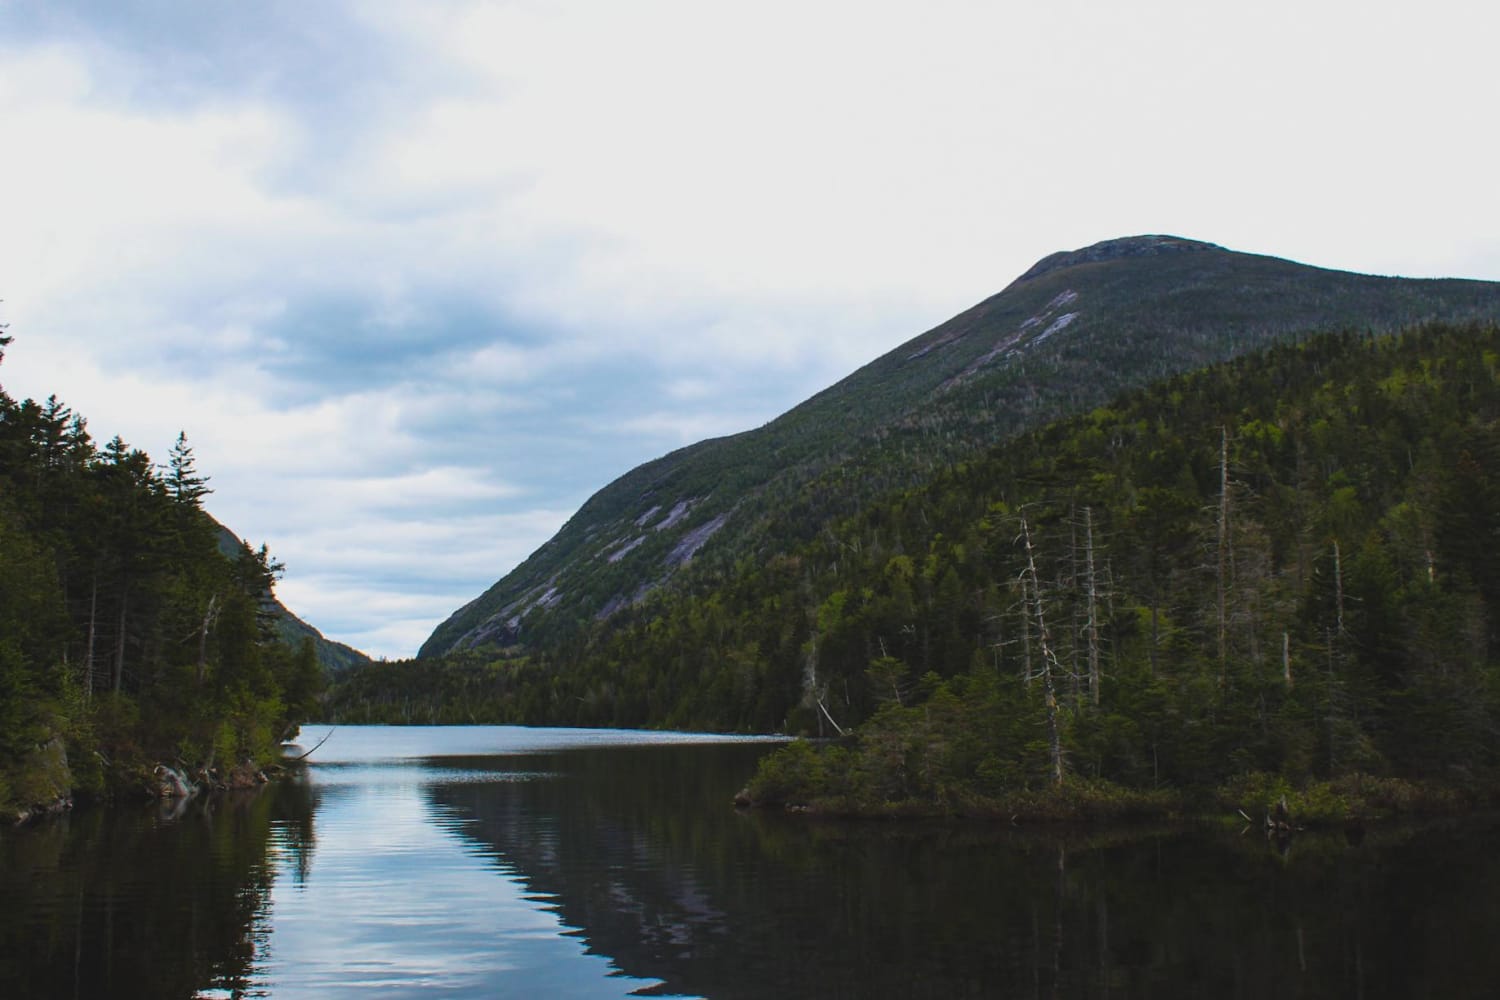 Lake Colden, ADK High Peaks Wilderness Area, NY, USA